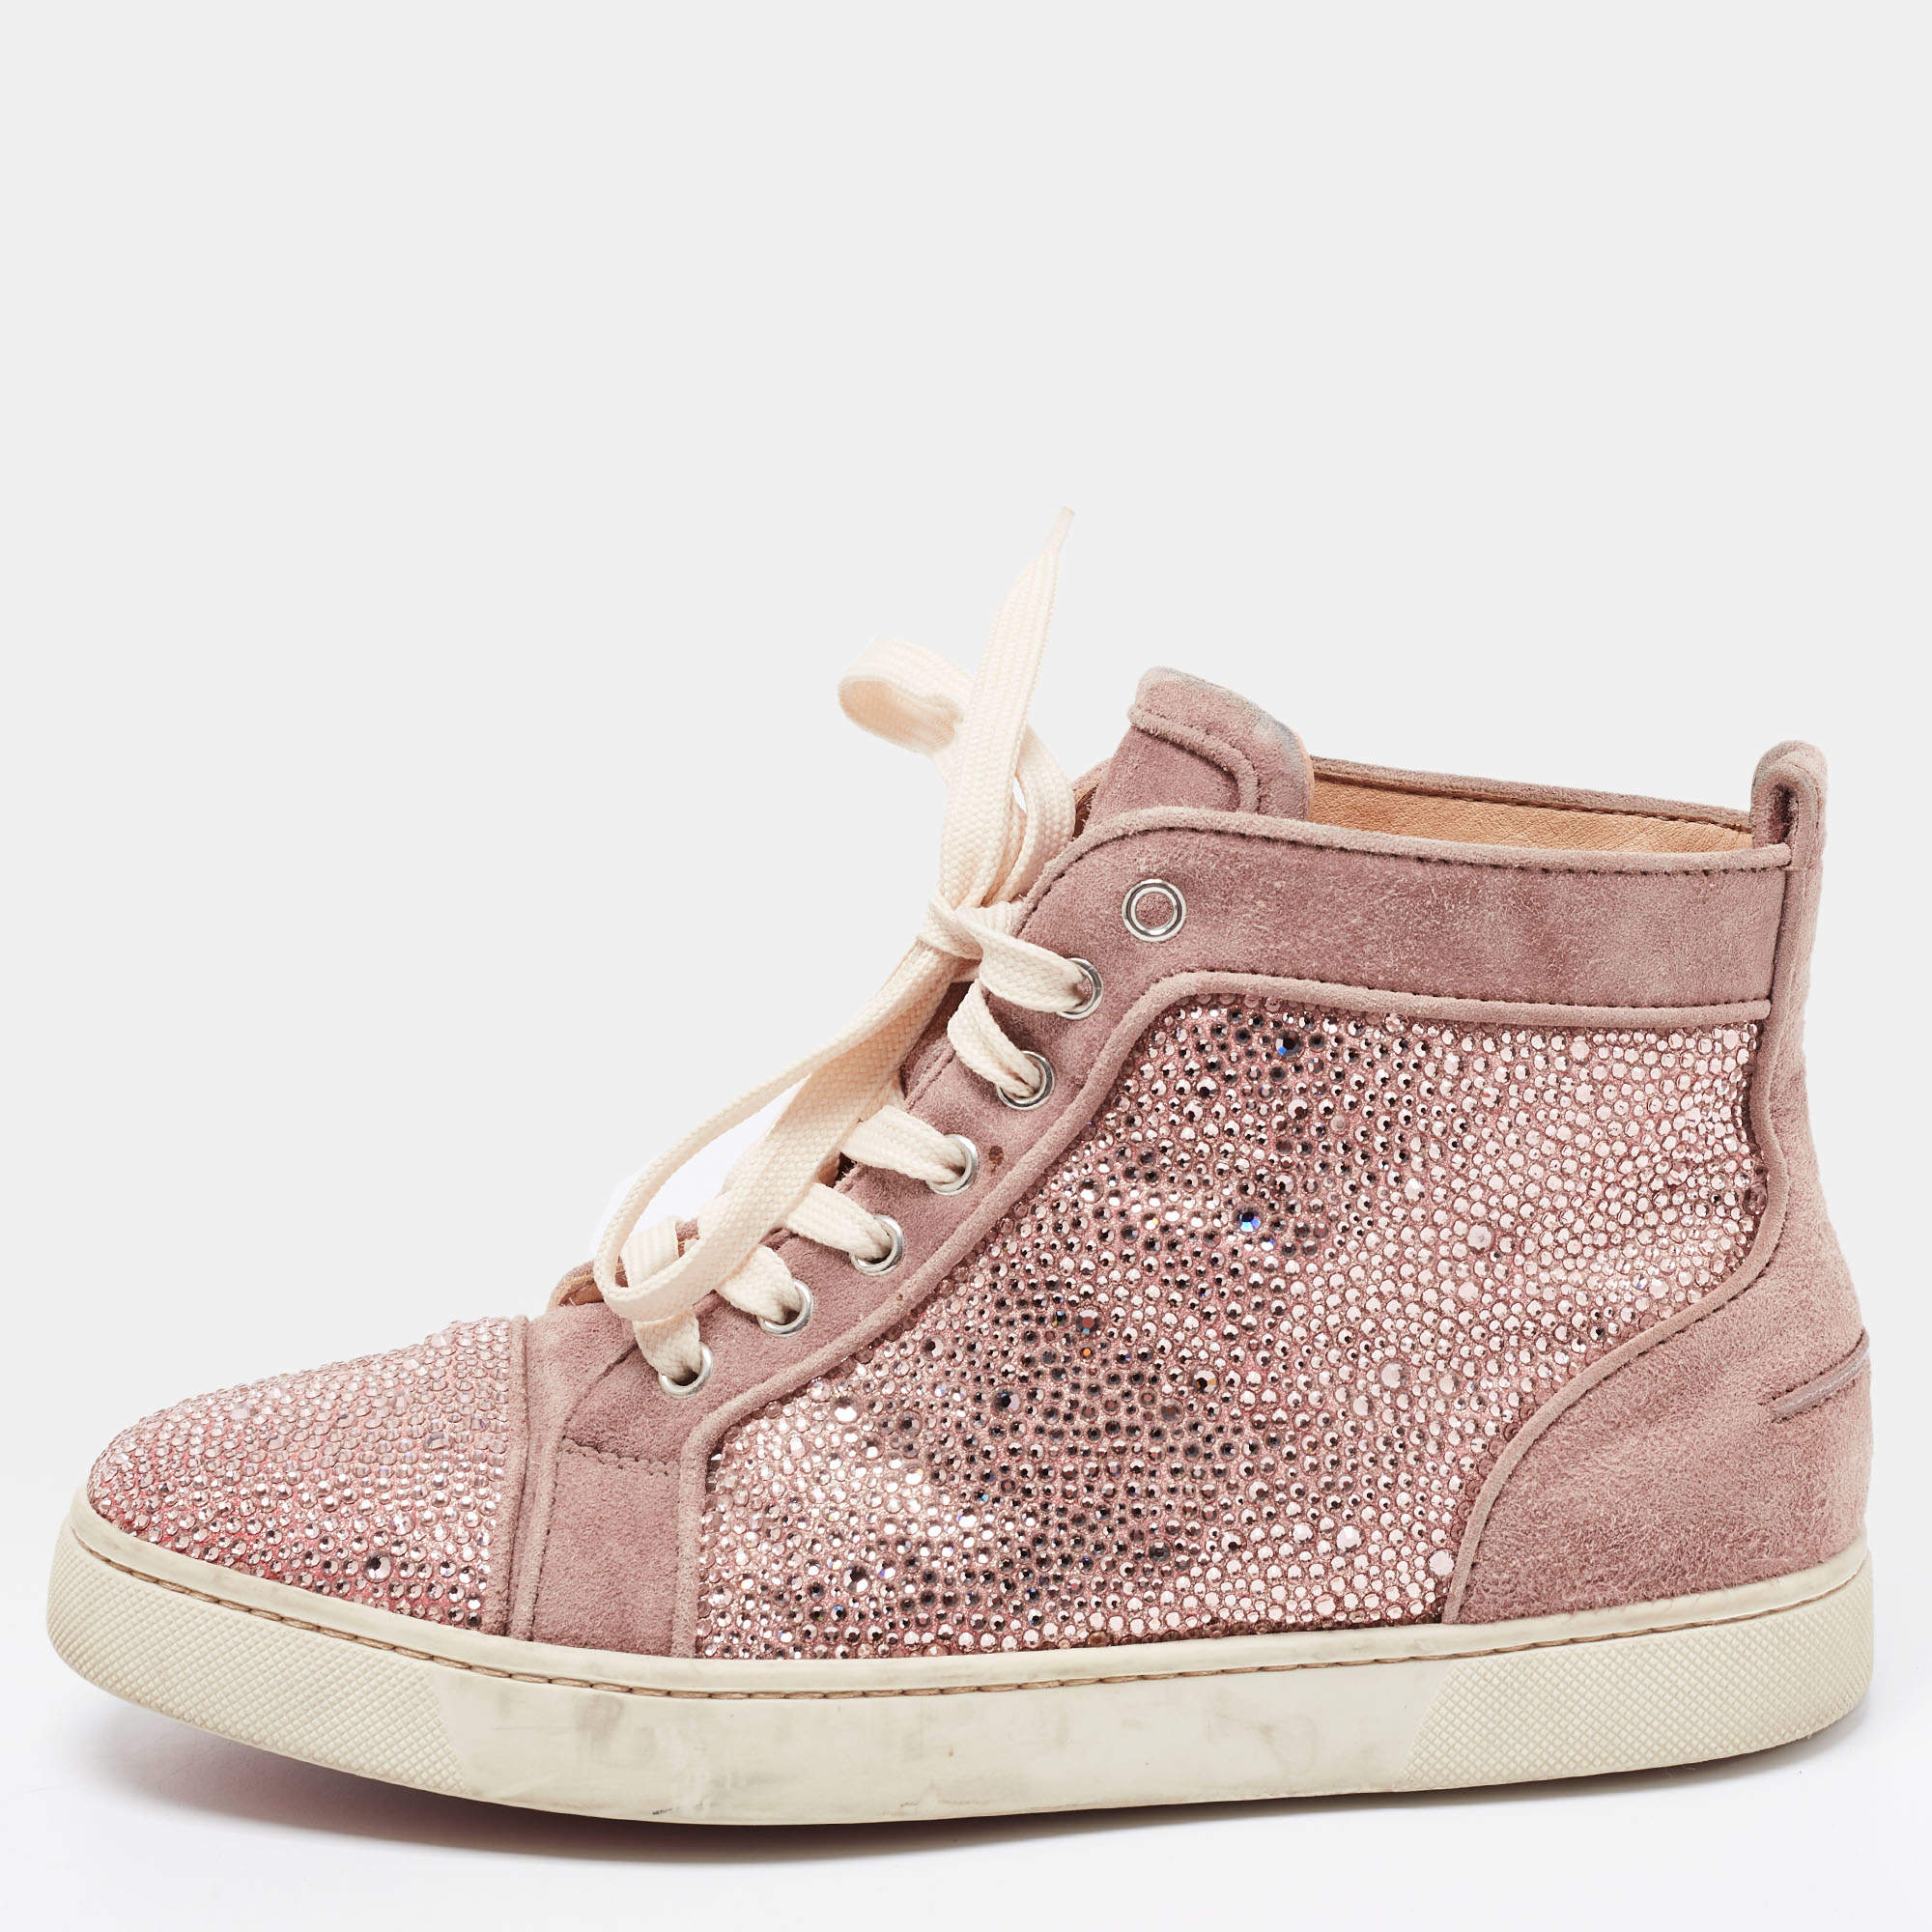 Christian Louboutin LOUIS BORDO Strass Crystal High Top Sneakers Shoes $1395